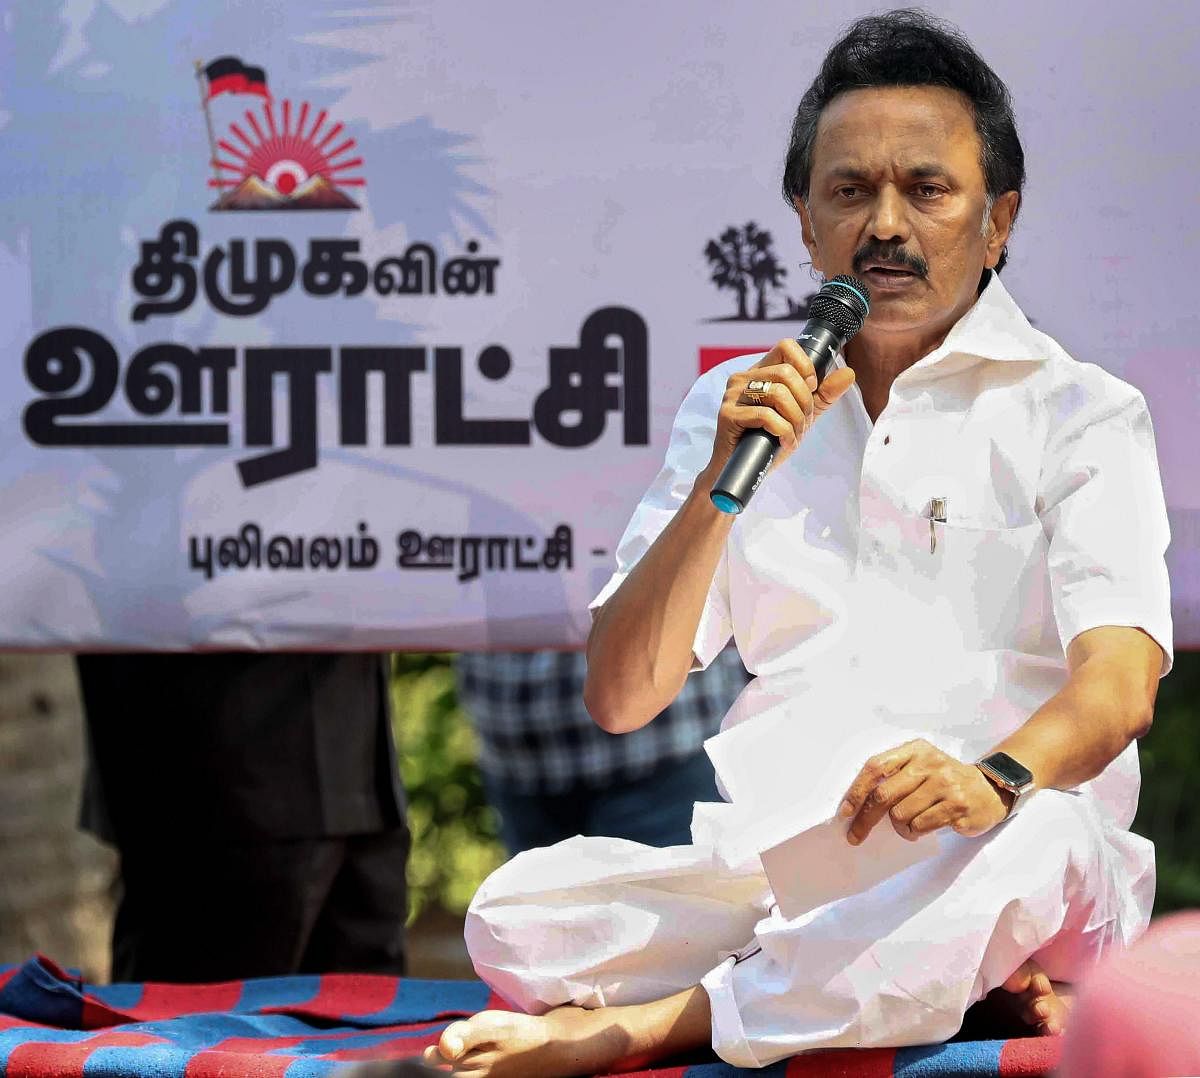 DMK will never ally with the Narendra Modi-led Bharatiya Janata Party (BJP) which has “dumped” the principles of social justice, secularism, equality and federalism in its last 4.5 years of rule at the Centre, party president M K Stalin said here on Friday. PTI photo